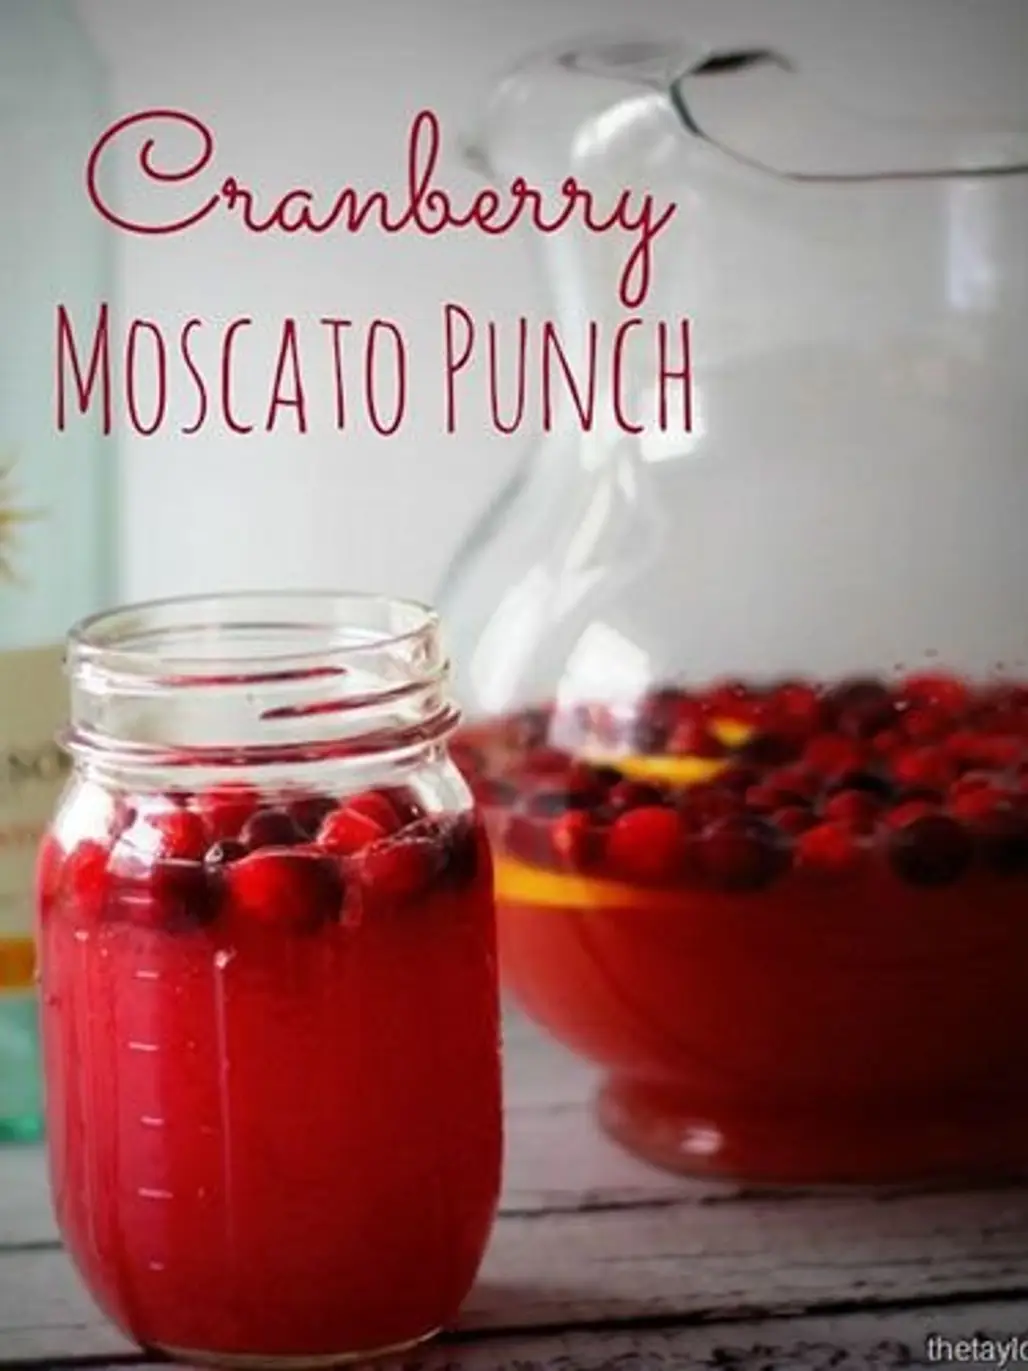 Cranberry Moscato Punch